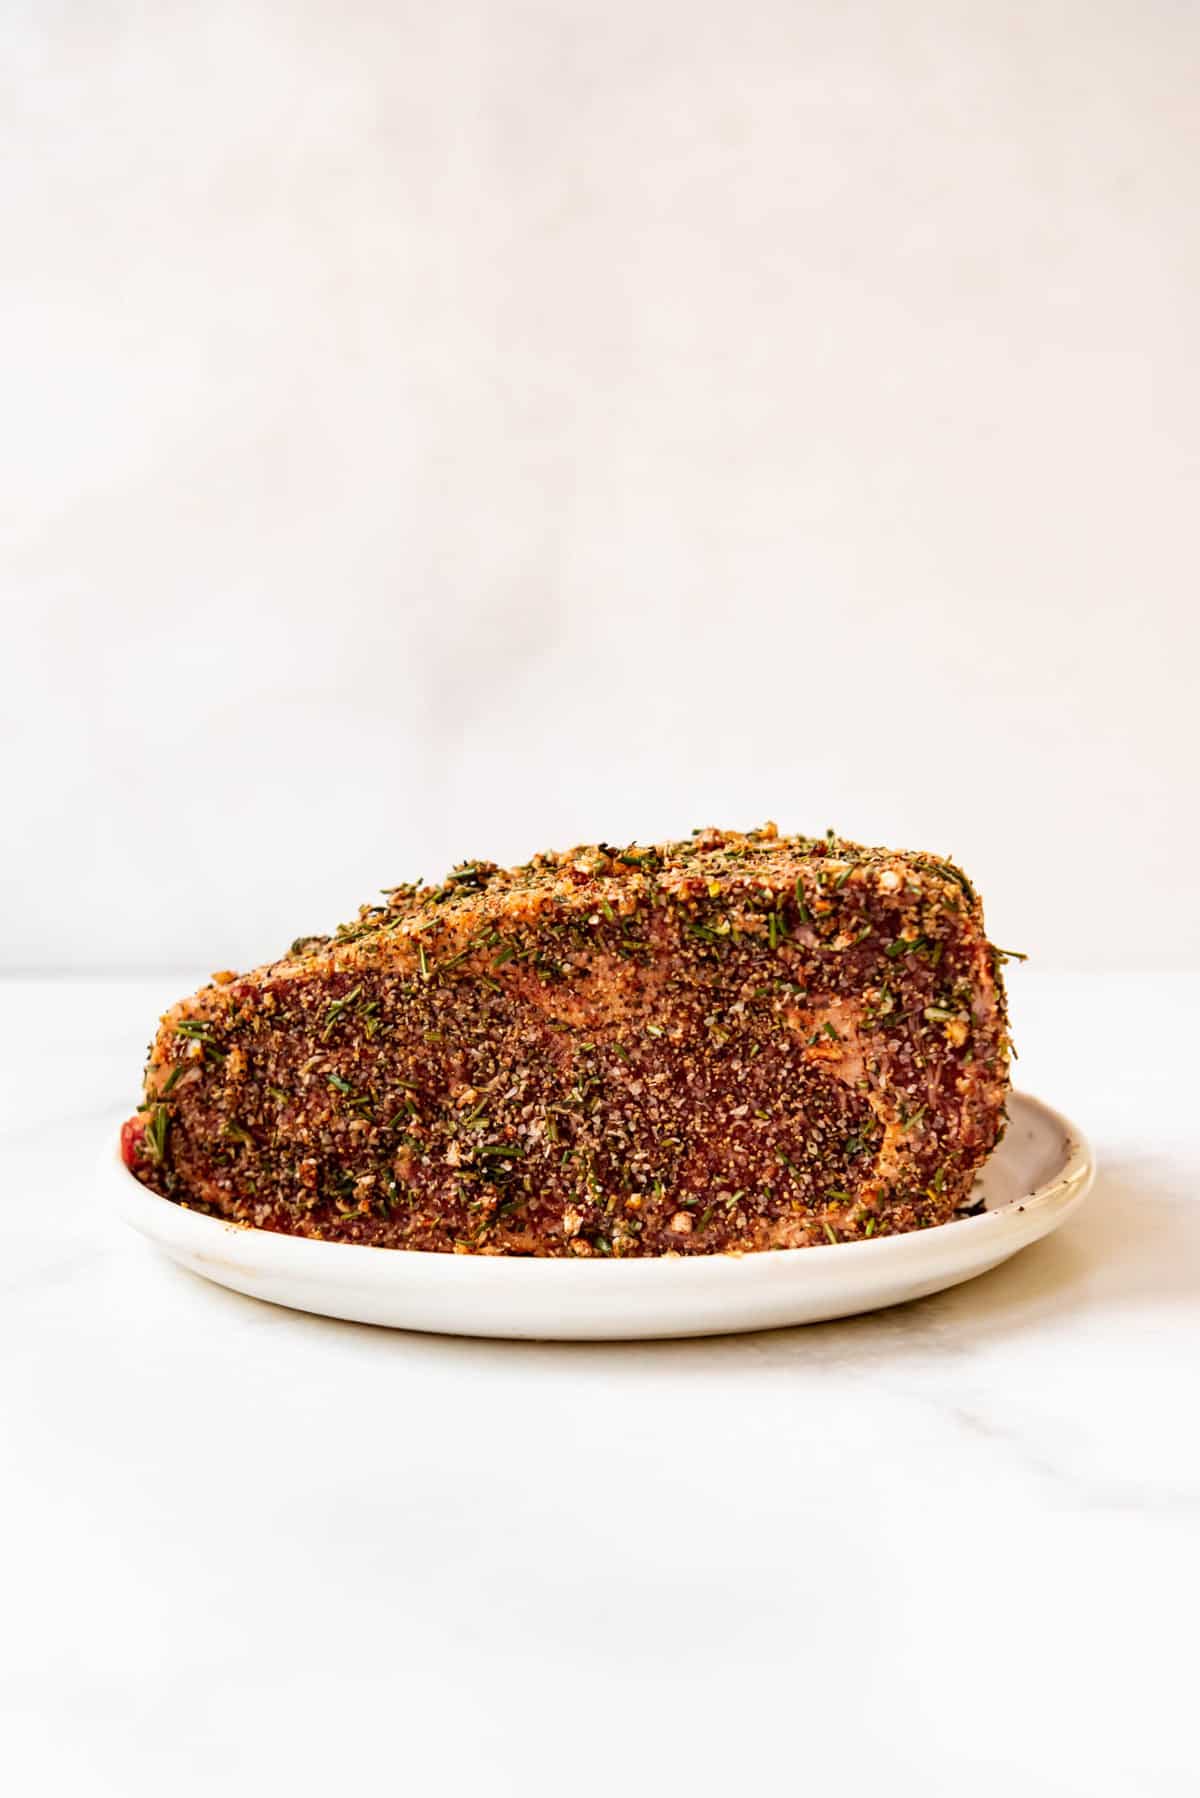 Prime rib roast that has been rubbed with kosher salt, pepper, herbs, and spices.